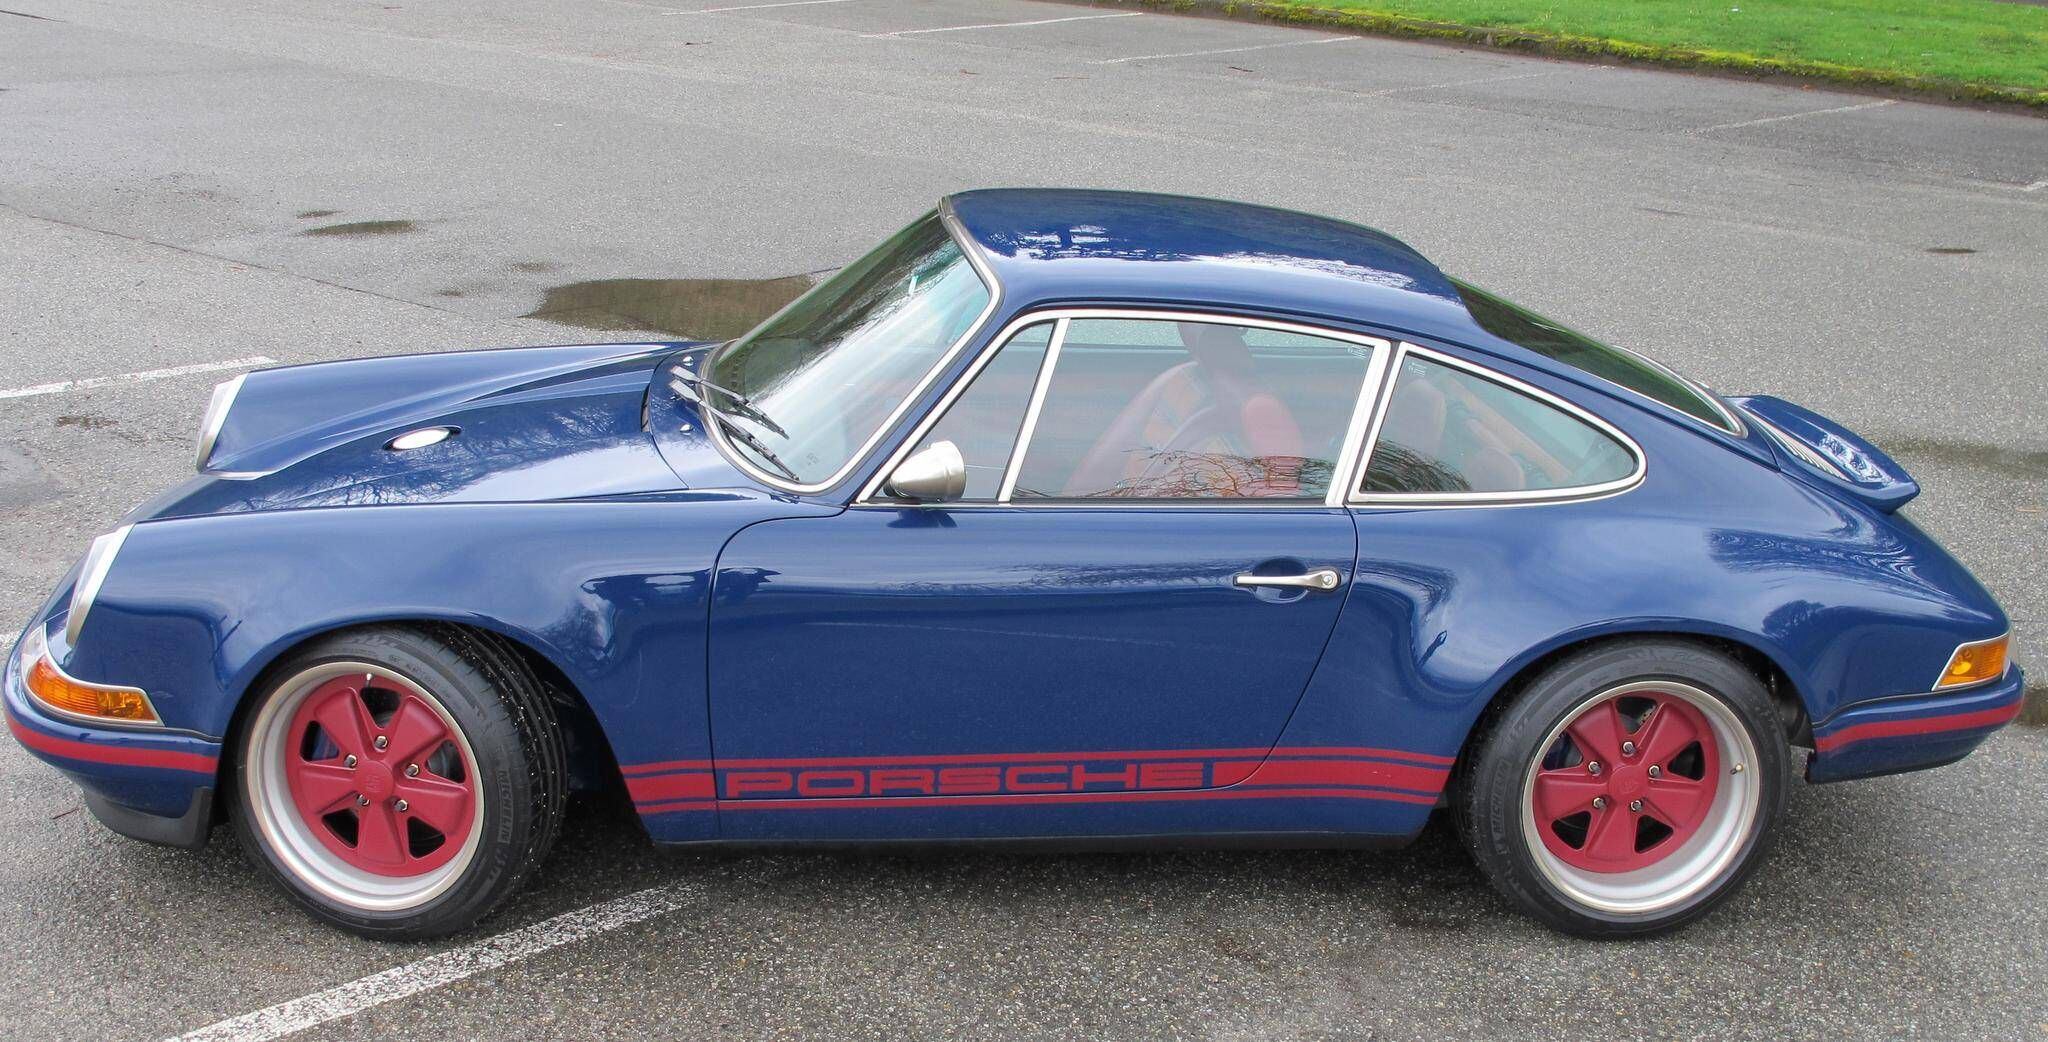 Why These Drivers Say A Singer Restored Porsche 911 Is Worth